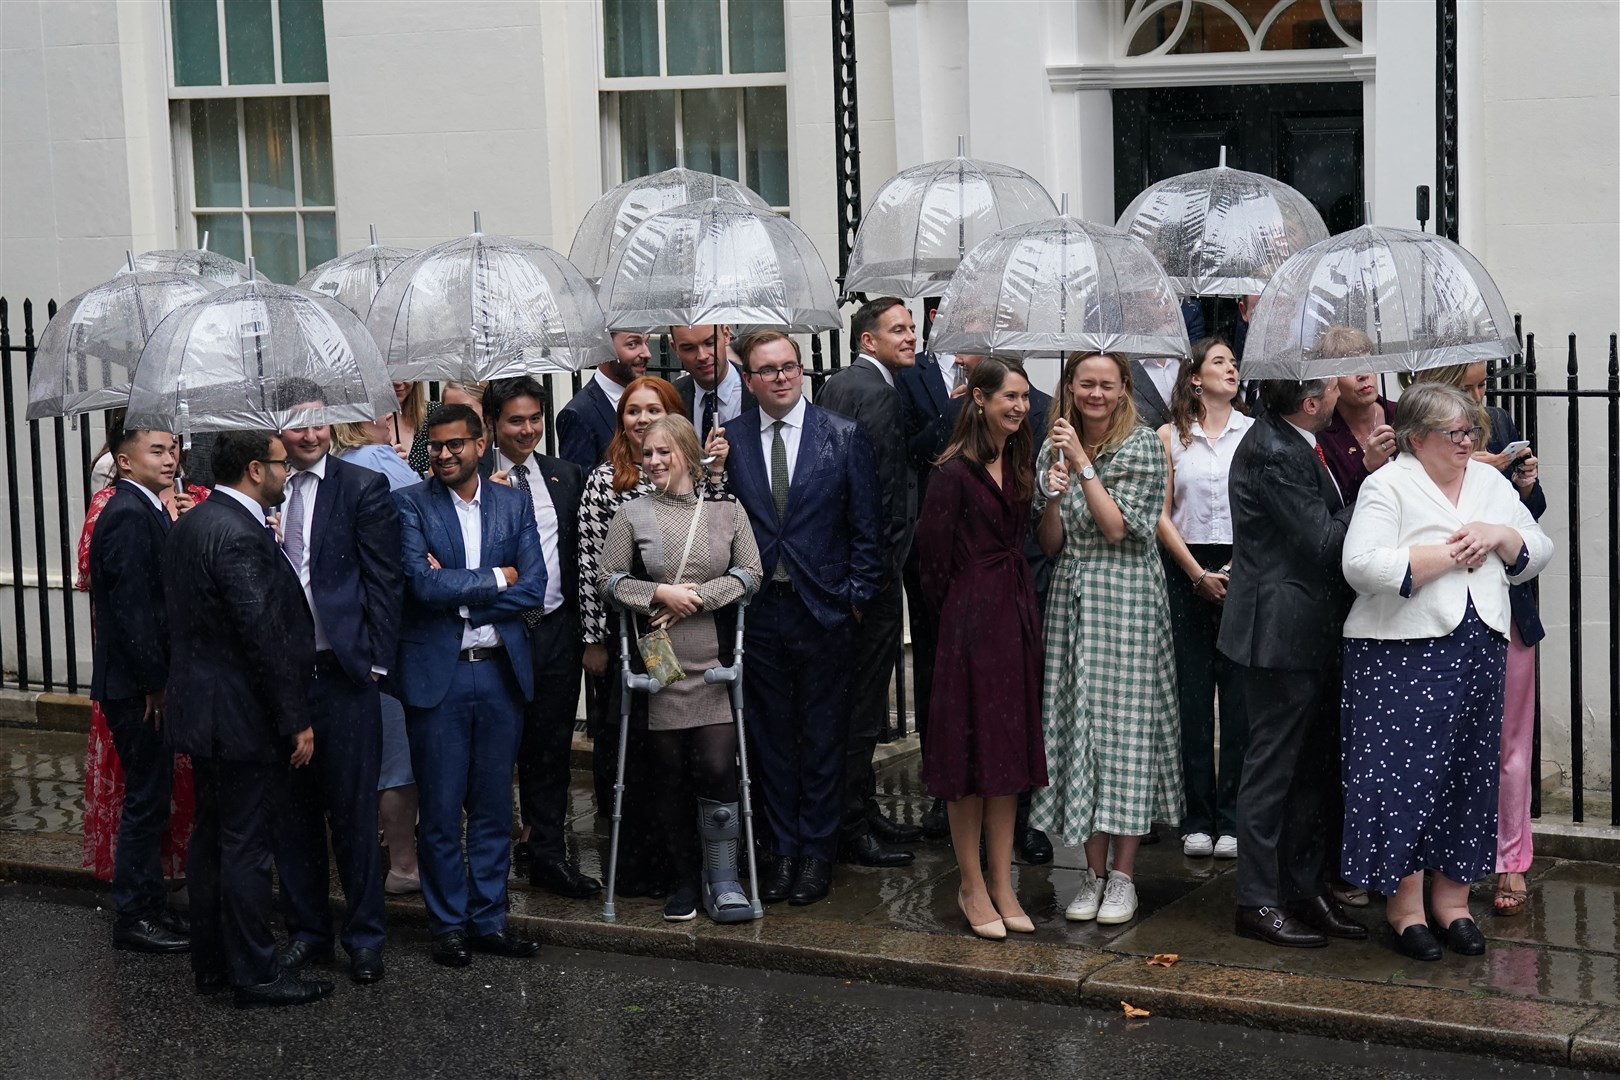 Downing Street staff and supporters gather under umbrellas (Kirsty O’Connor/PA)